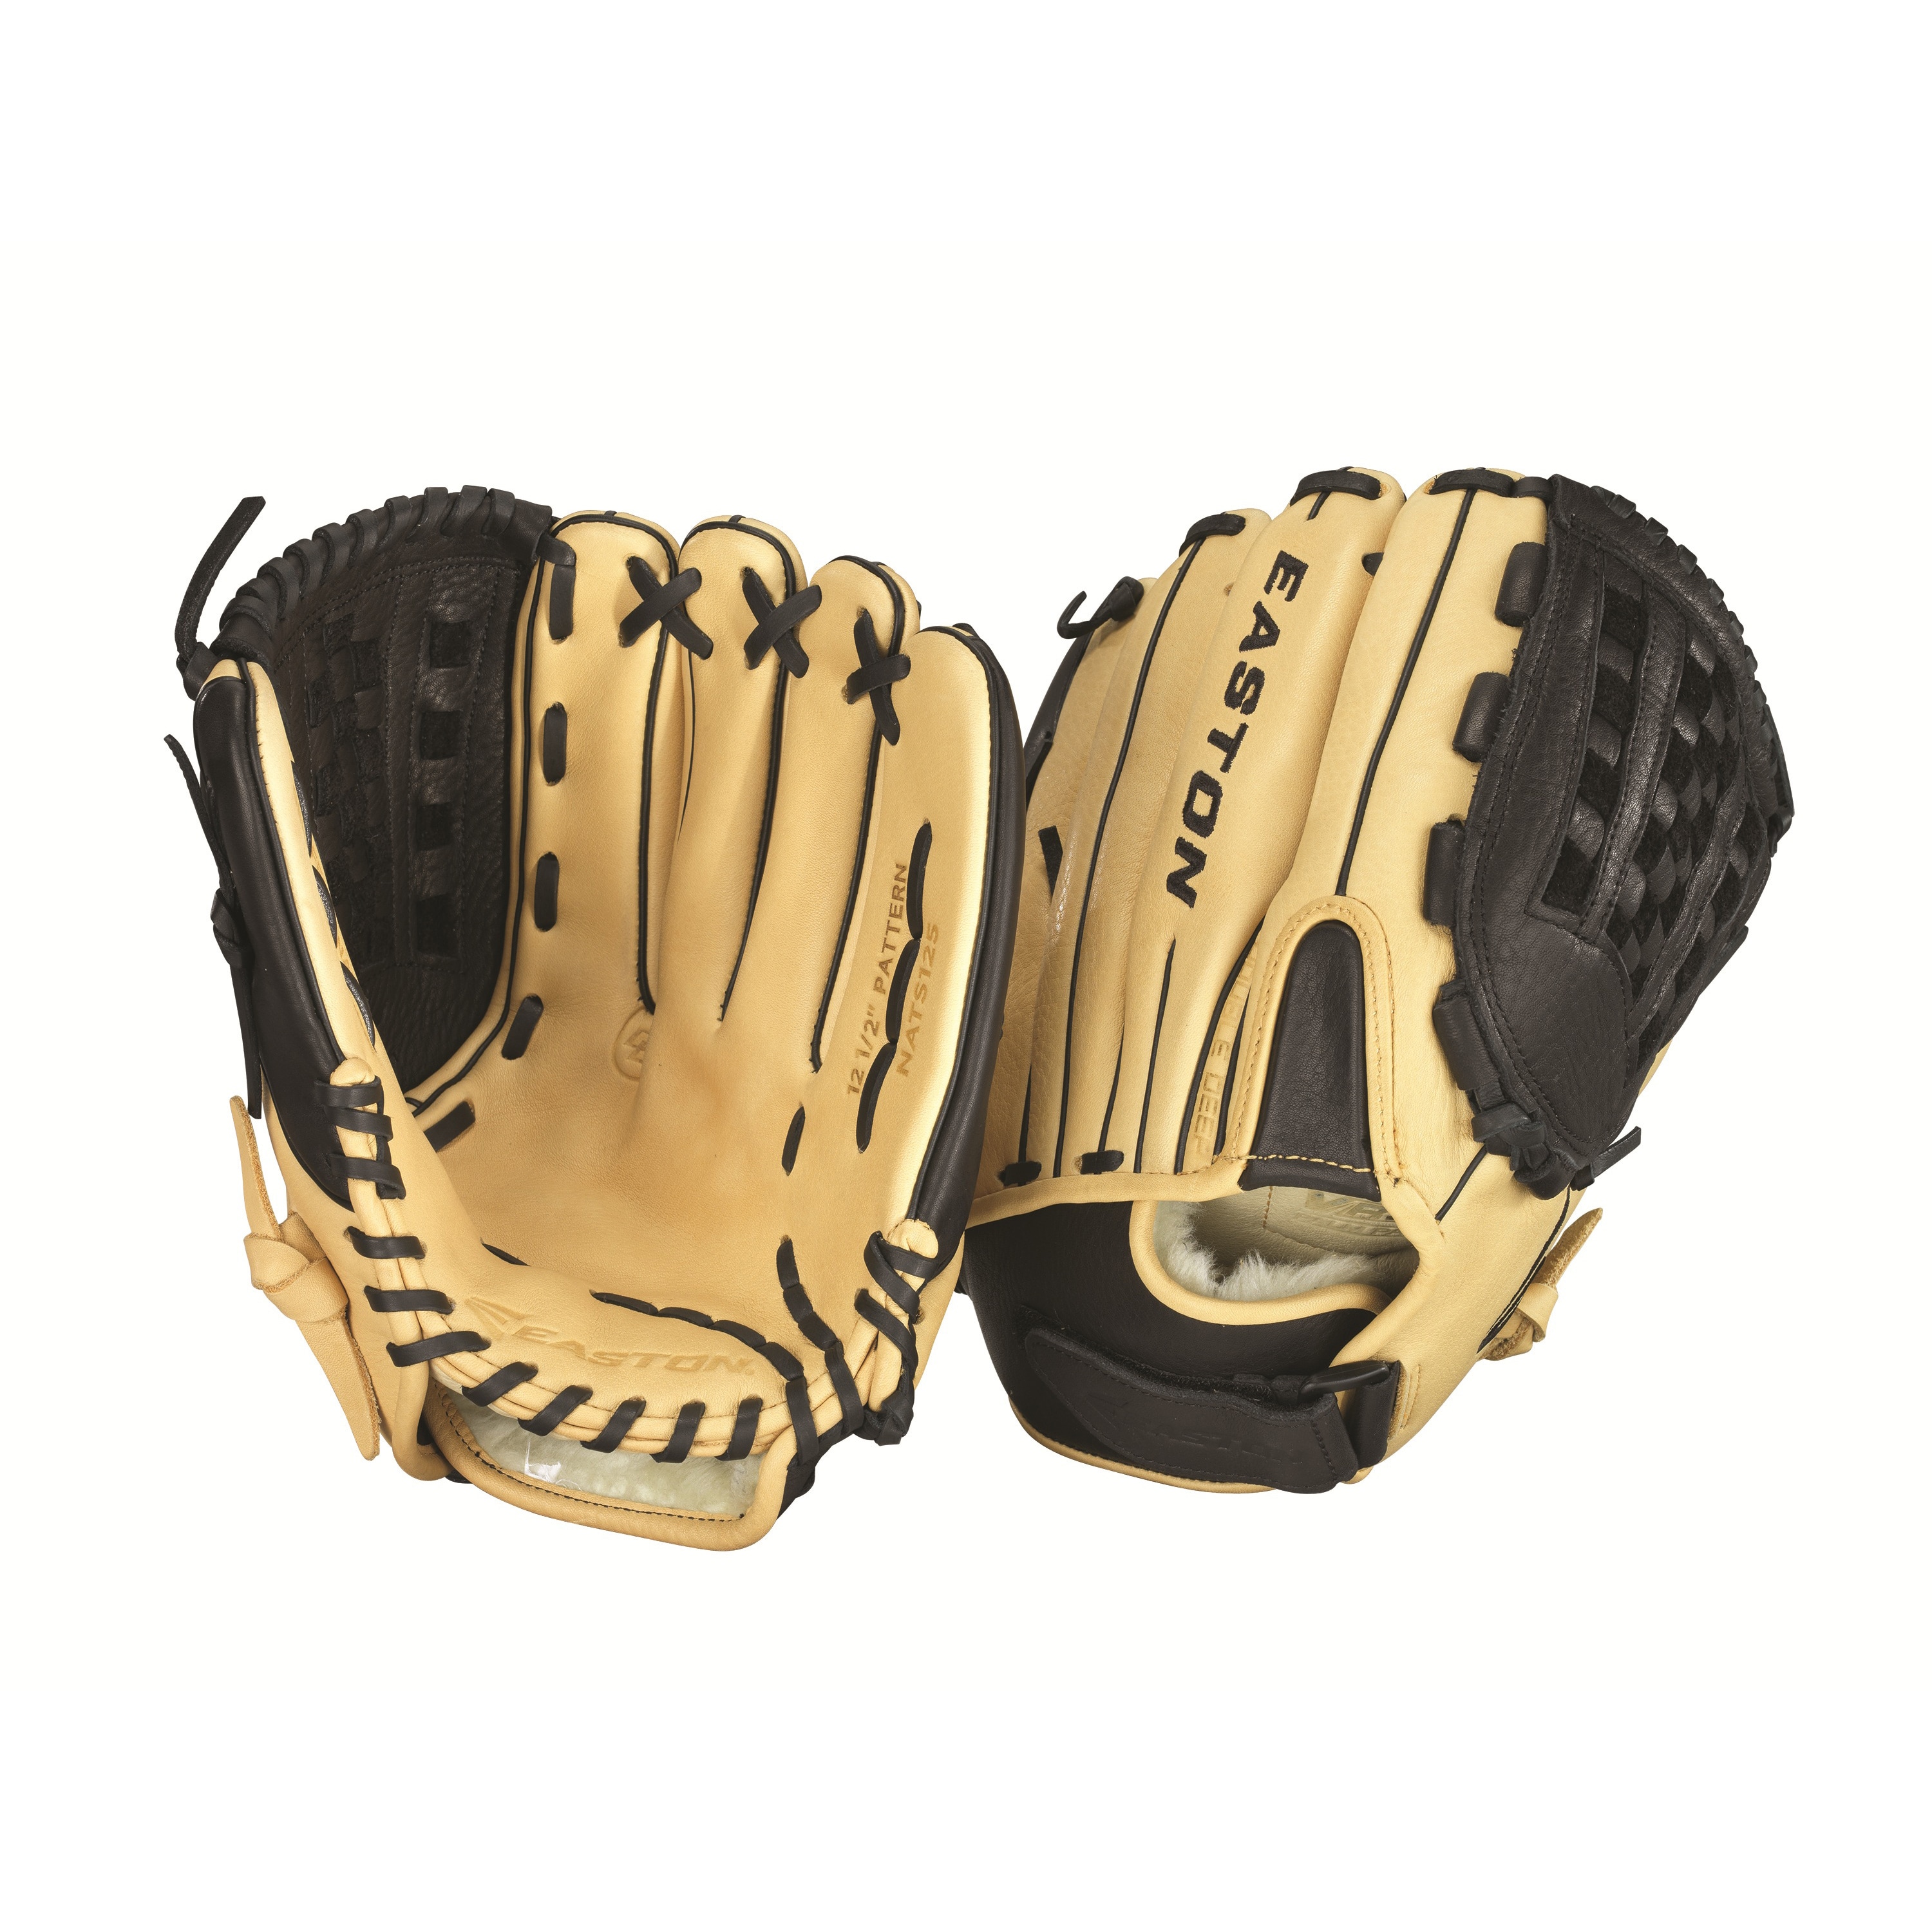 Easton 12.5 inch Natural Elite Lht Baseball Glove (Tan/brownDimensions 22 inches long x 11.75 inches wide x 8.5 inches highWeight 1.38 pounds )